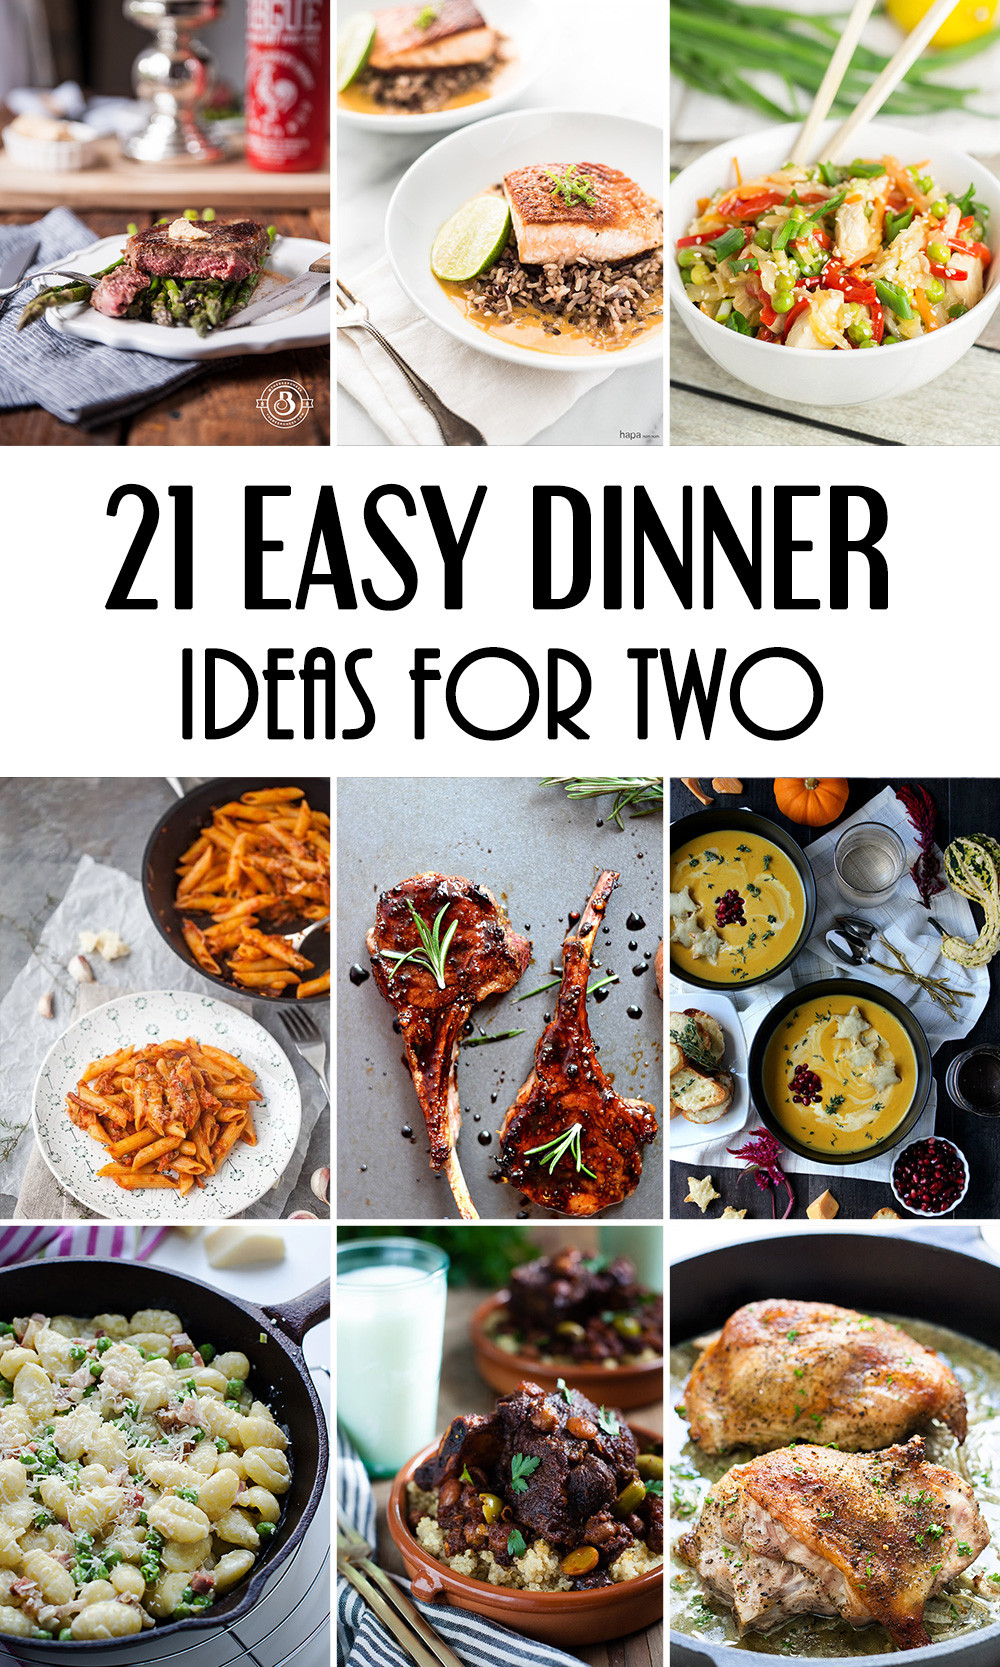 Easy Dinner Recipes For Two
 21 Easy Dinner Ideas For Two That Will Impress Your Loved e